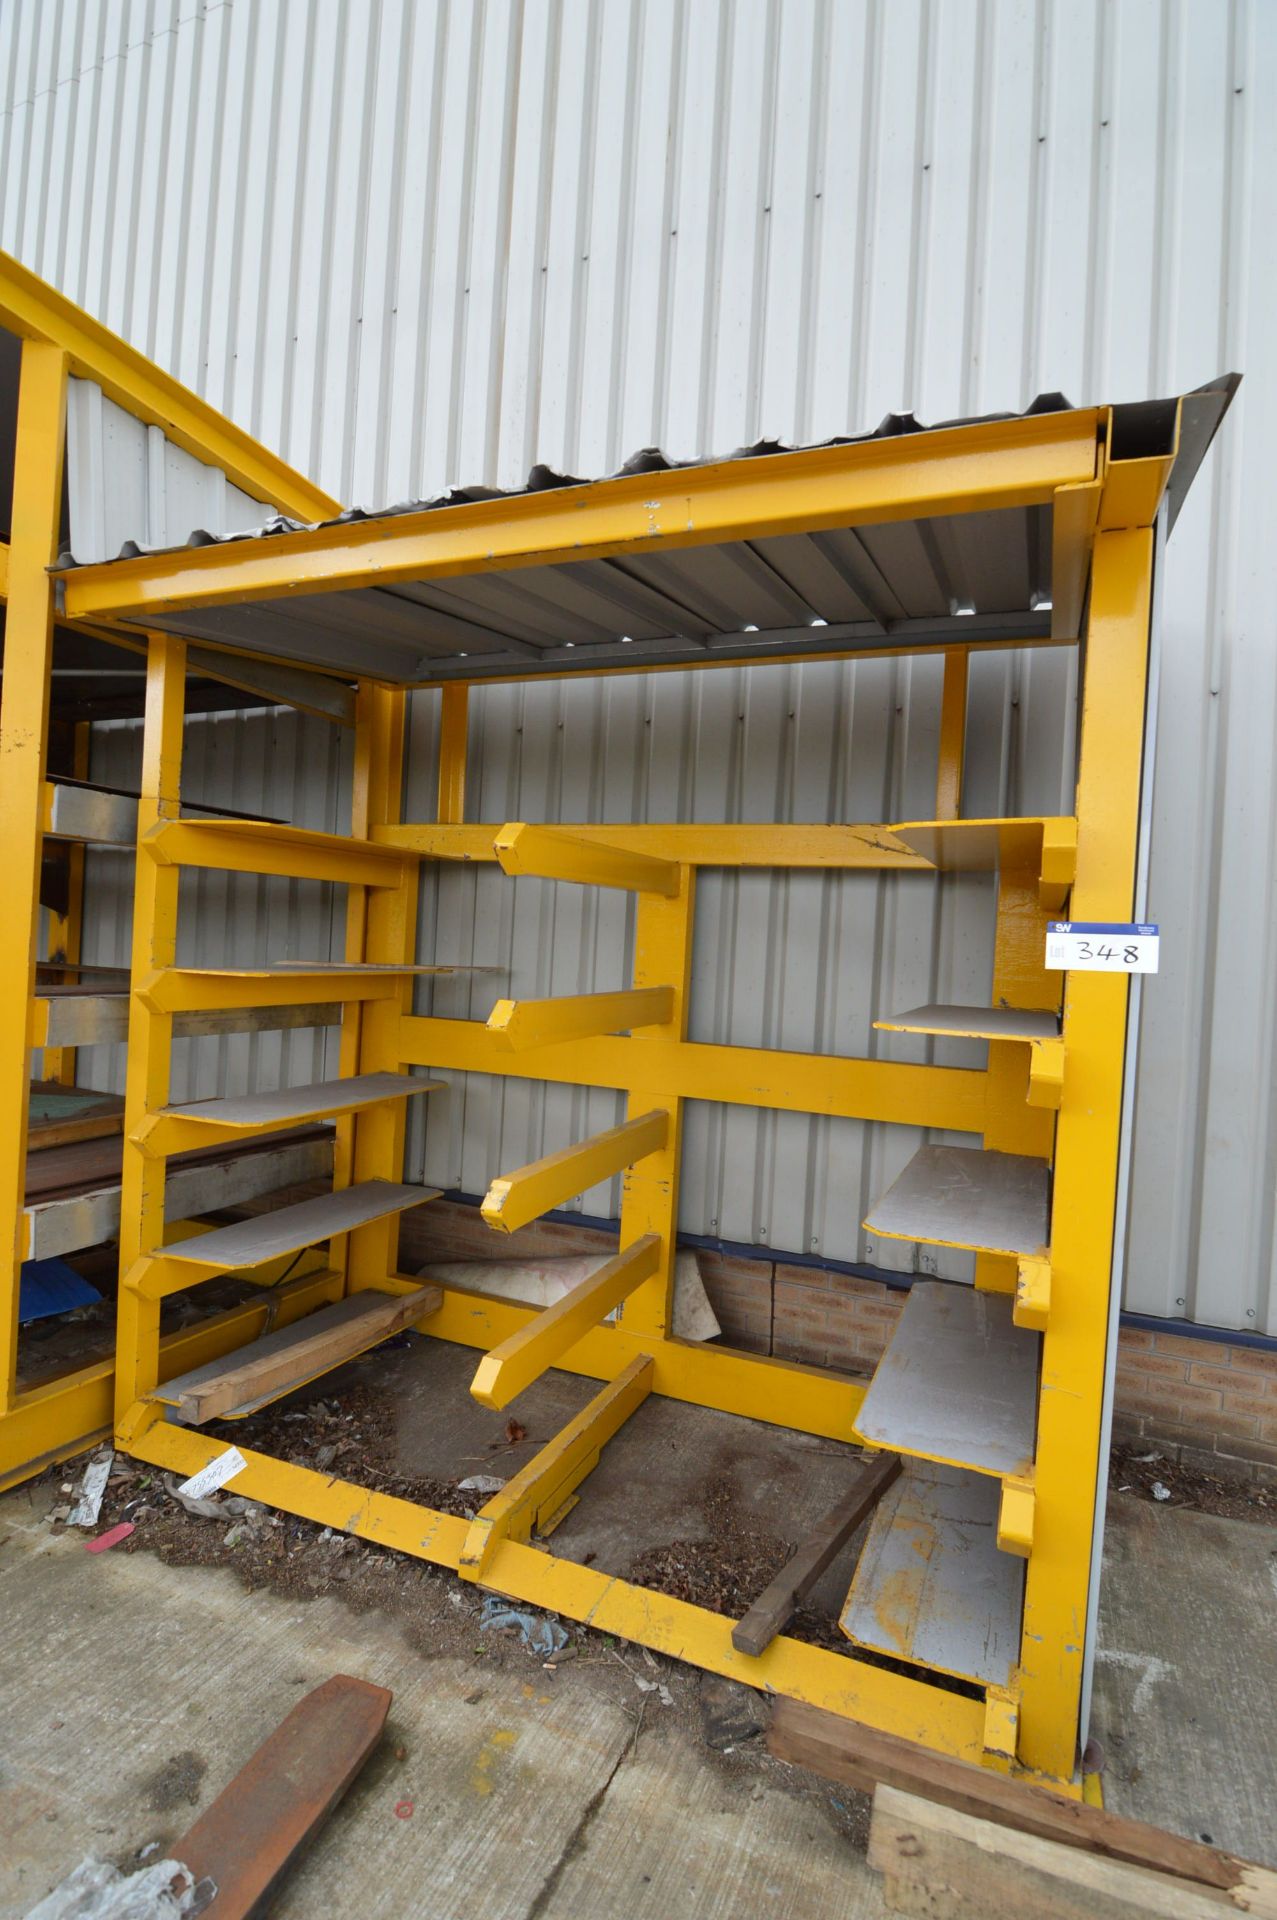 Fabricated Steel Five Tier Sheet Rack, 2.5m wide, with contents